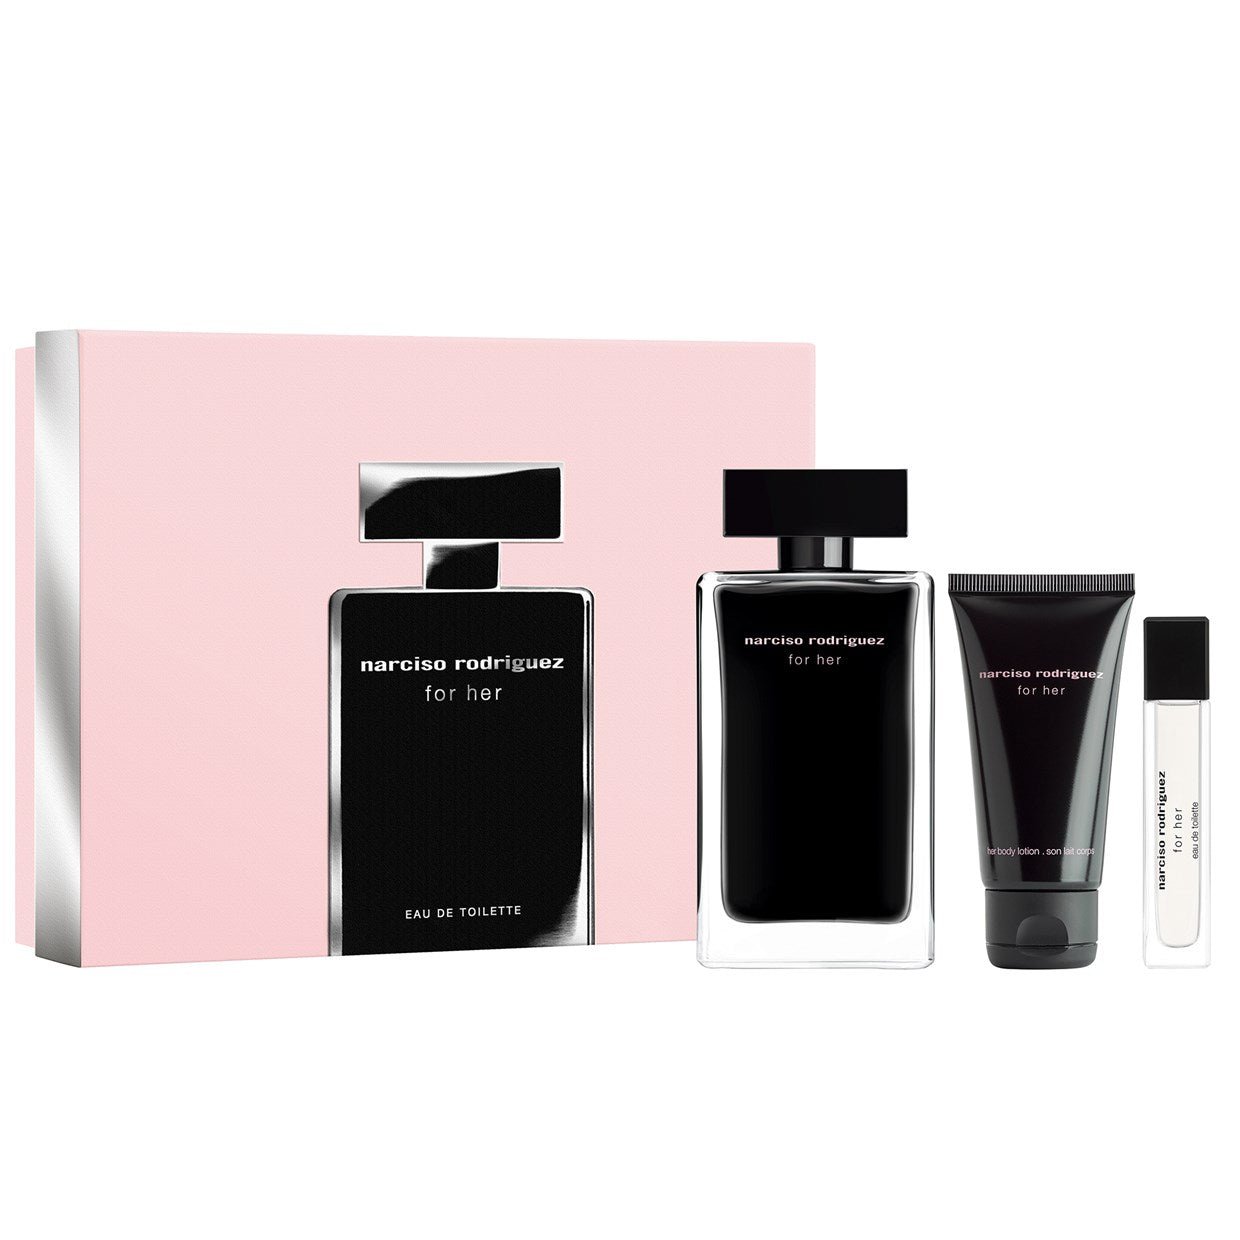 Narciso Rodriguez For Her EDT & Body Lotion Collection | My Perfume Shop Australia